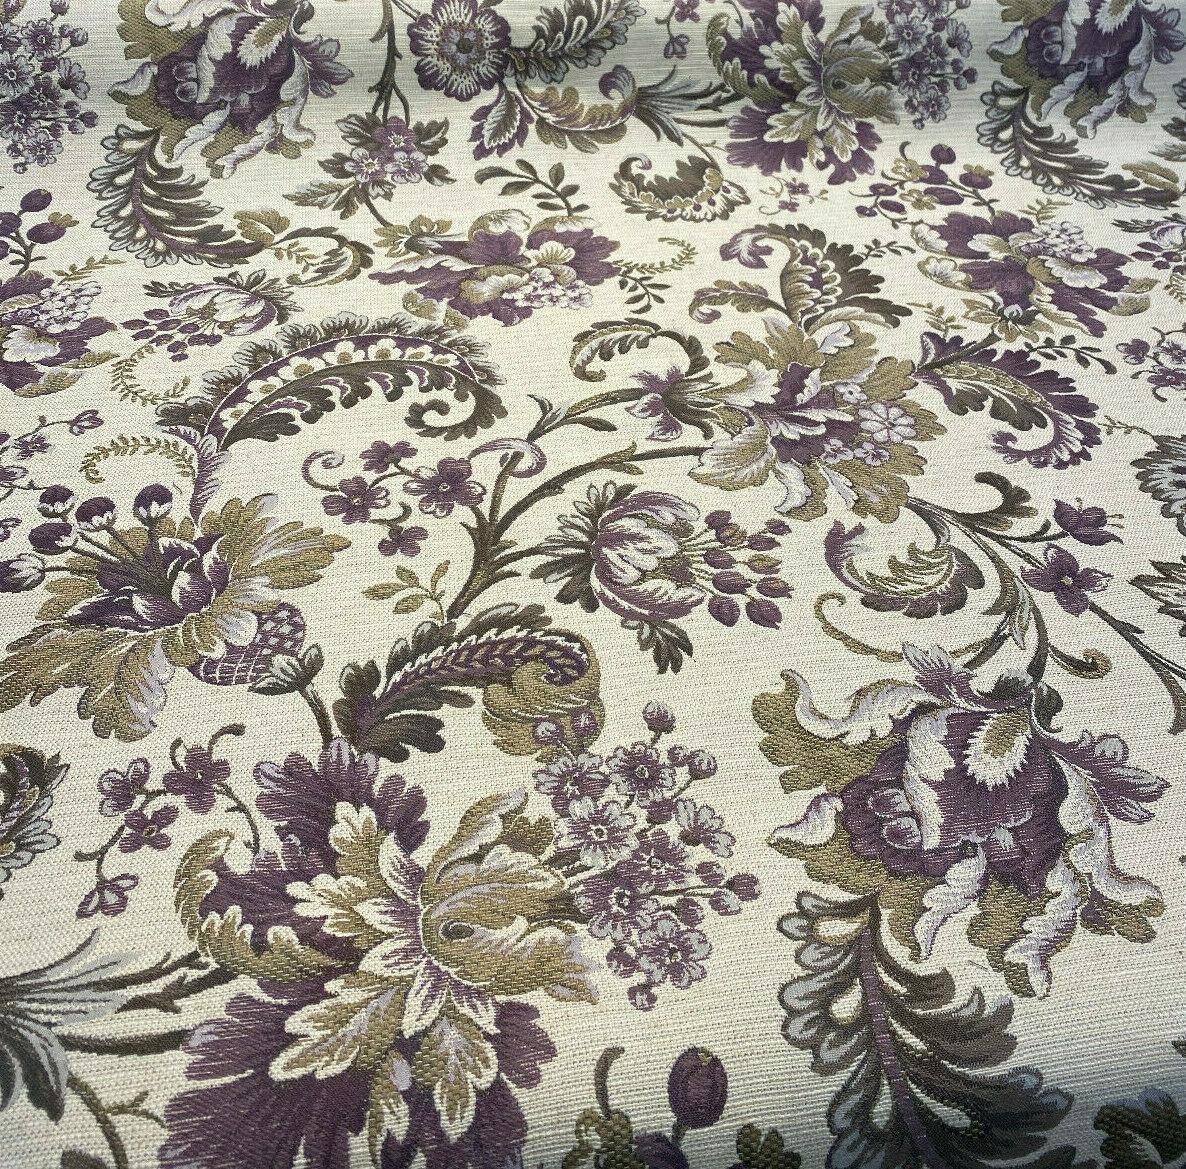 Razzmatazz Stripe Purple Chenille Tapestry Upholstery Fabric by The Yard :  Arts, Crafts & Sewing 